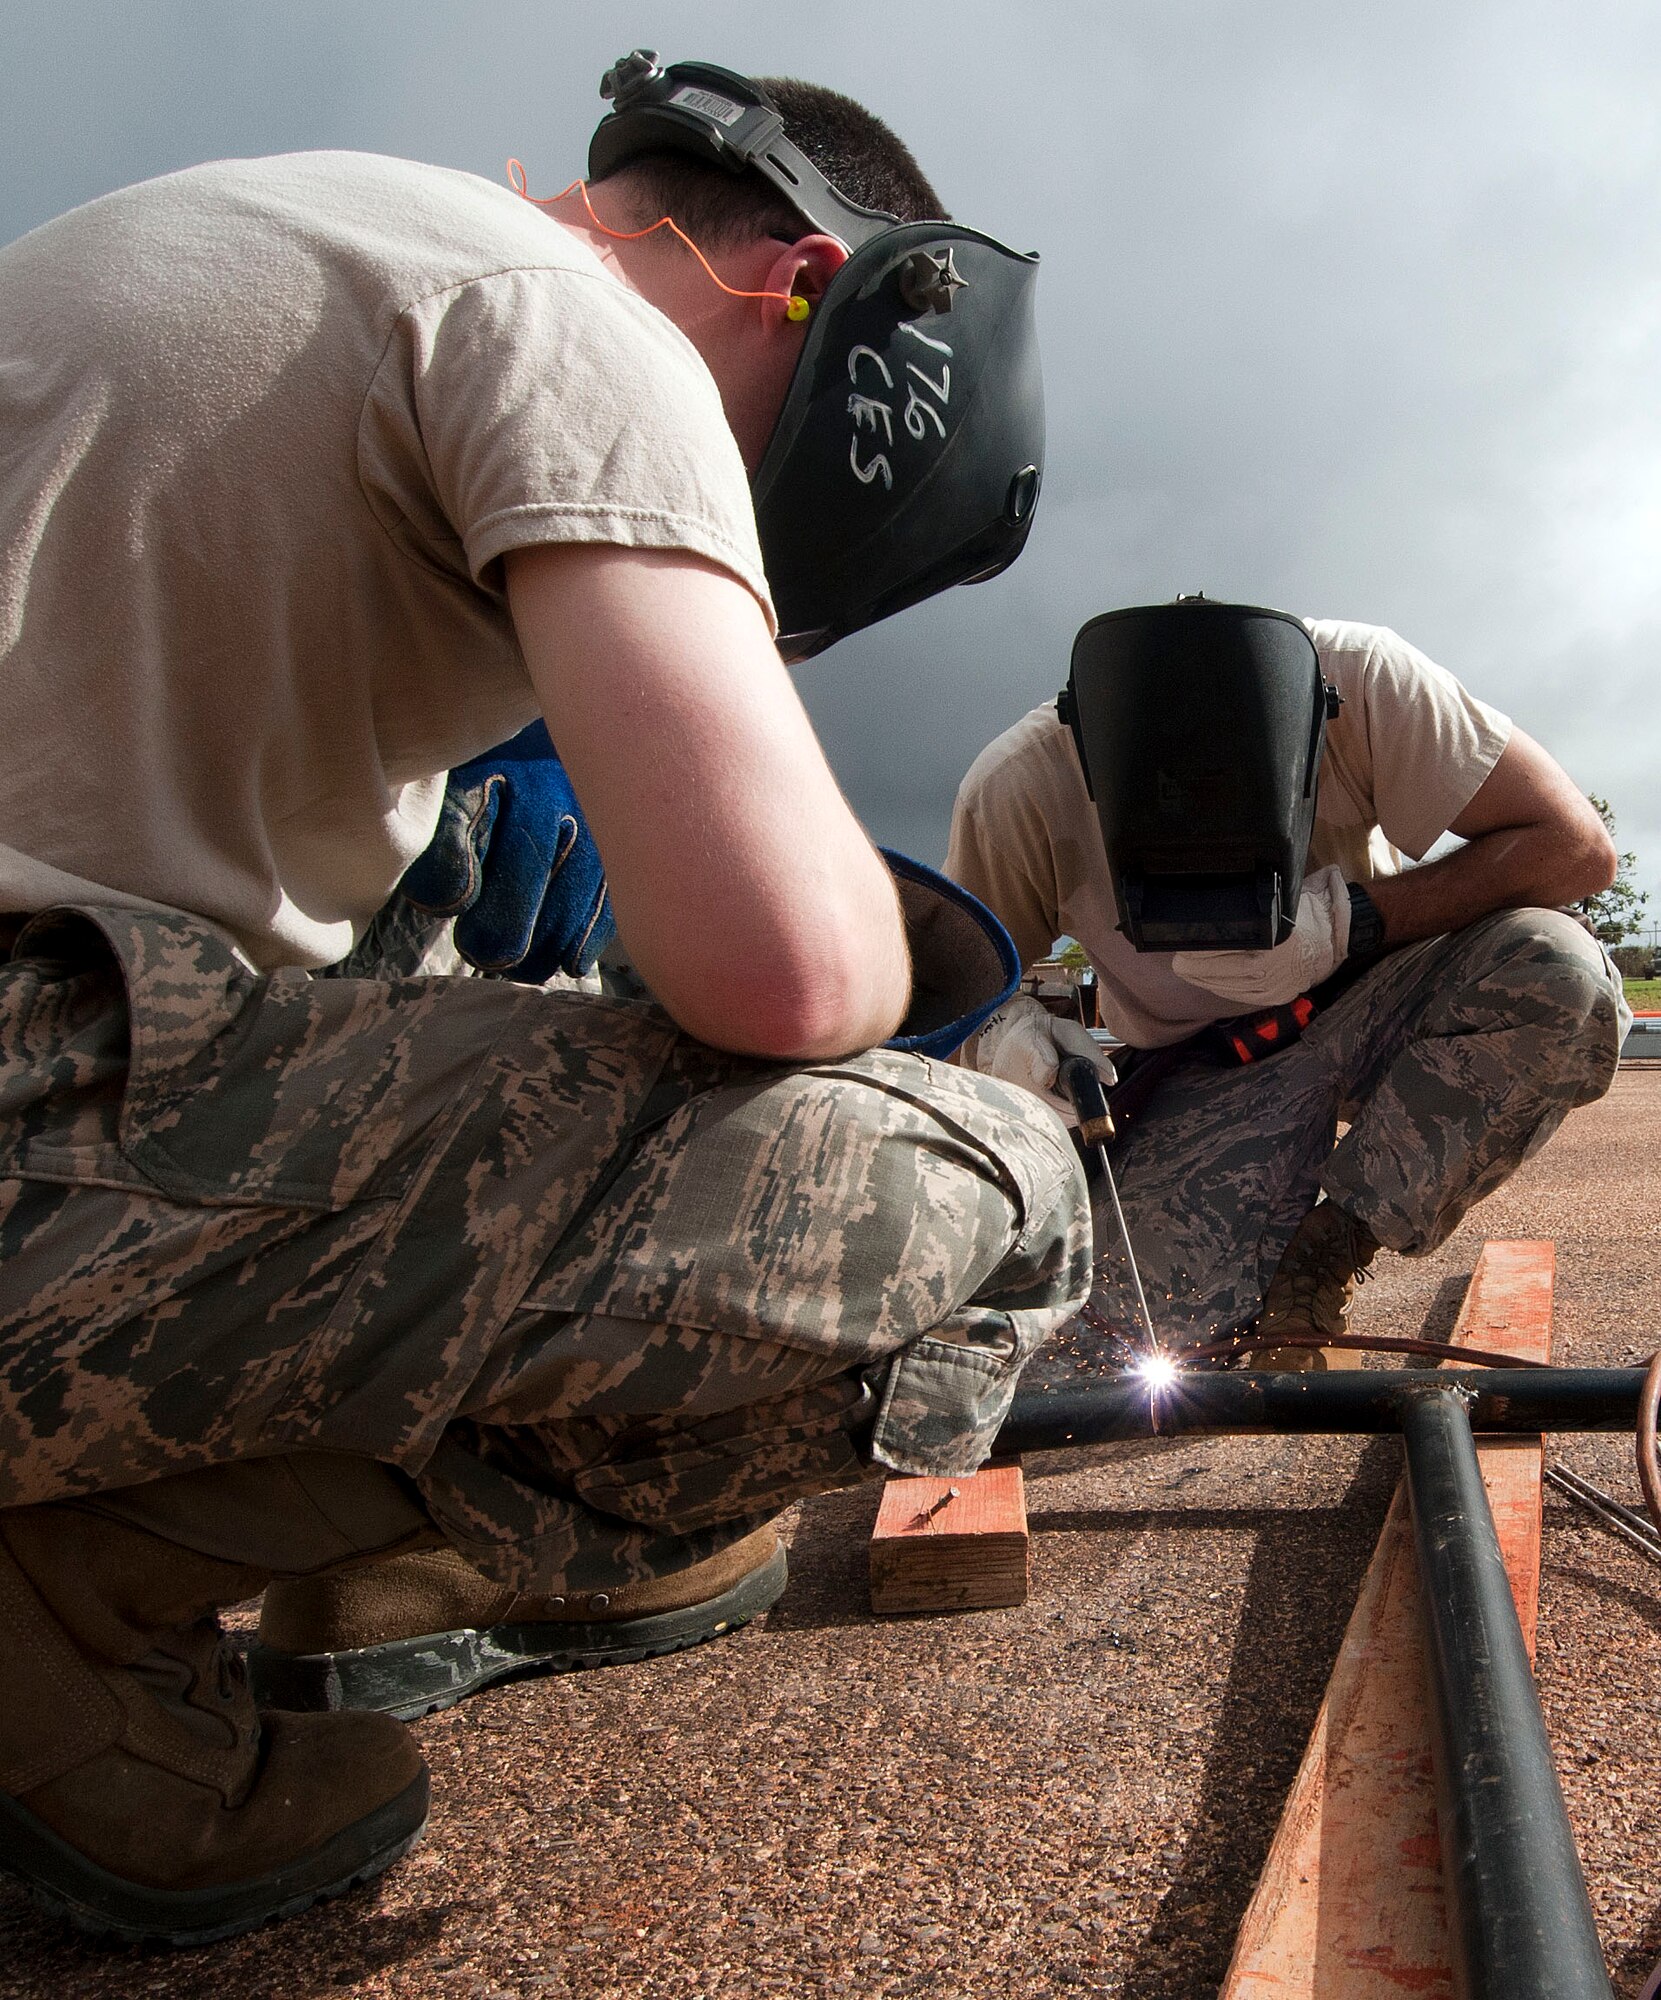 H.E. HOLT NAVAL COMMUNICATION STATION, Australia – Airman 1st Class Phillip Gifford, left, and Tech. Sgt. Mark Hill of the Alaska Air National Guard’s 176th Civil Engineer Squadron weld a safety railing here May 6, 2017. Thirty-four Alaska Air Guard members, most from the 176th CES, deployed for two weeks to this tiny outpost at the far western tip of Australia to help build a space radar facility to be jointly operated by Australia and the United States. U.S. Air National Guard photo by Capt. John Callahan/ Released.